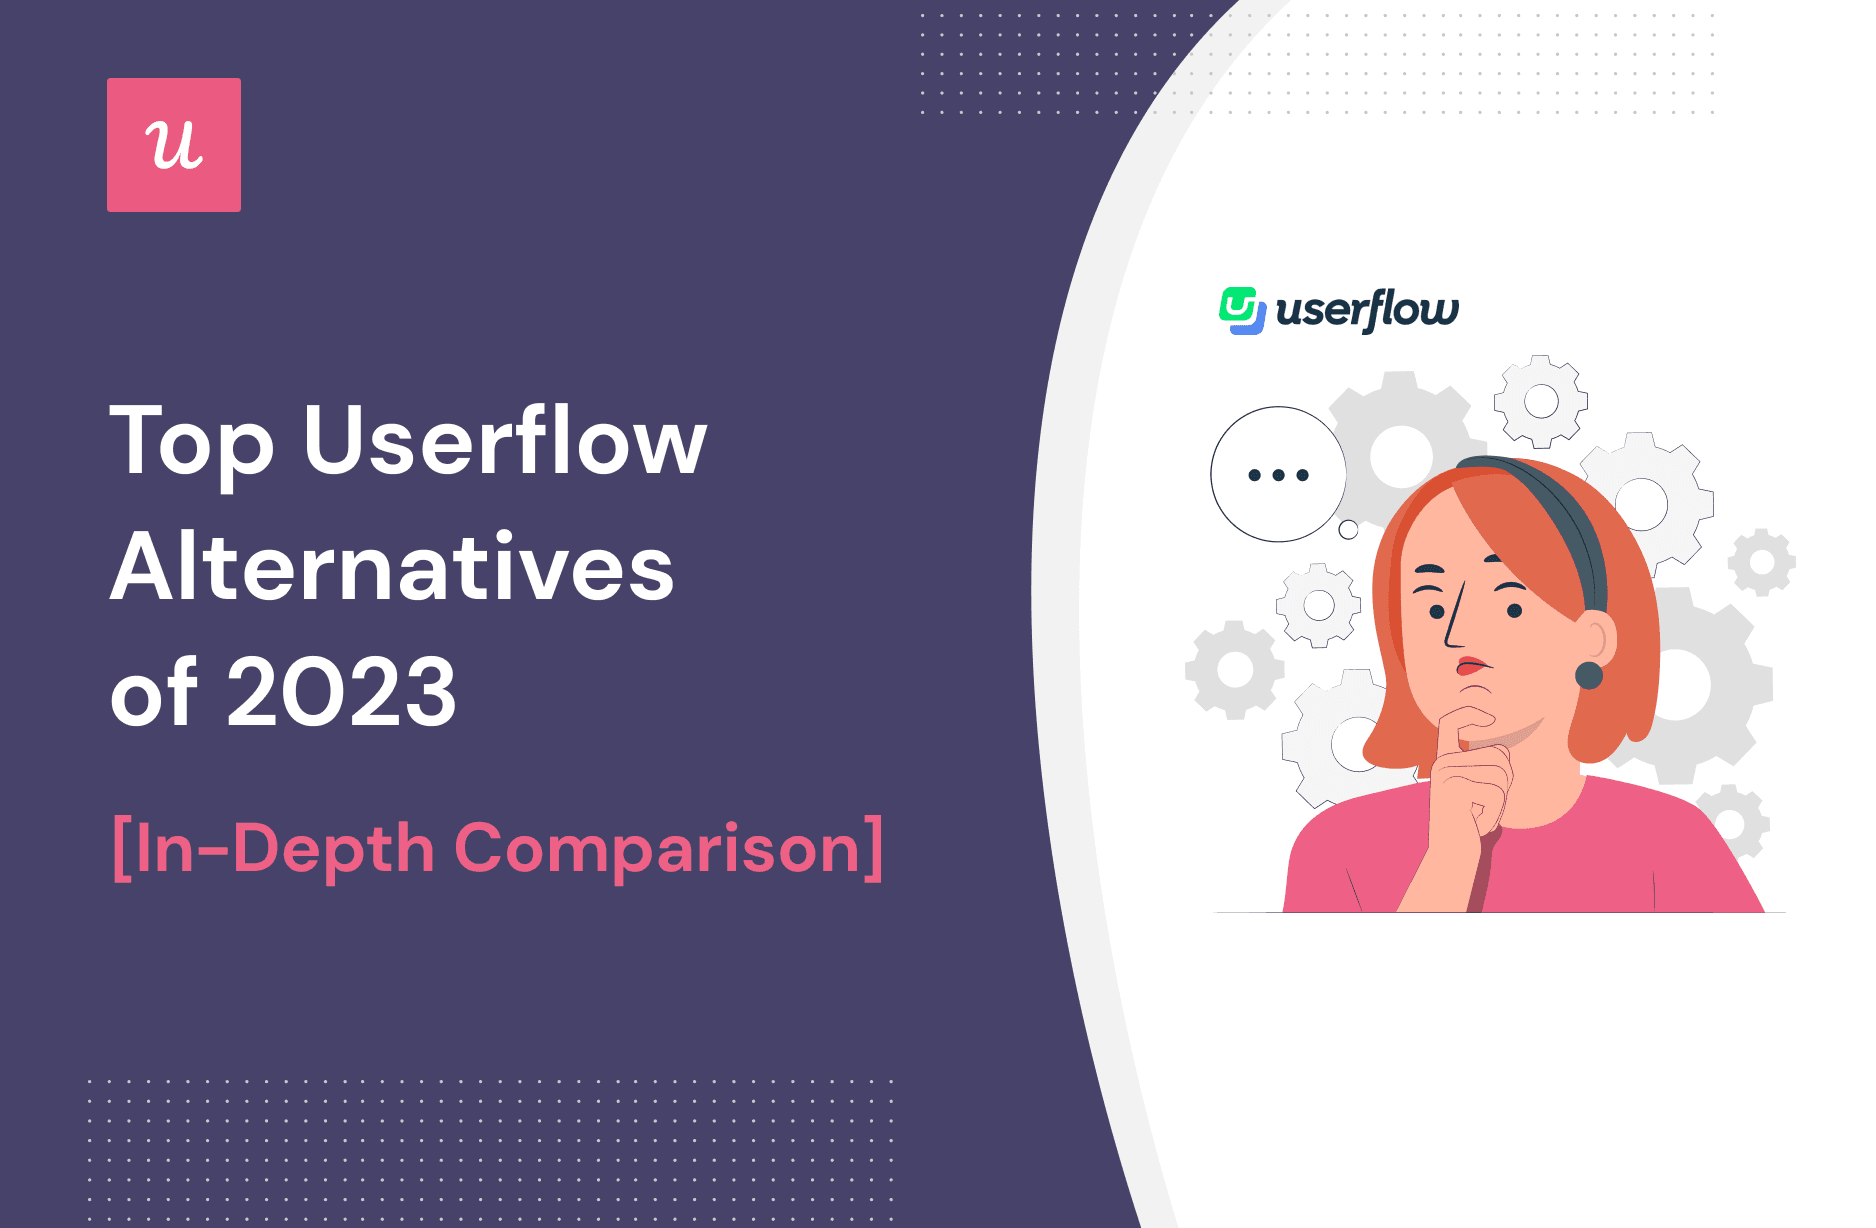 Top Userflow Alternatives of 2023 (In-Depth Comparison) cover